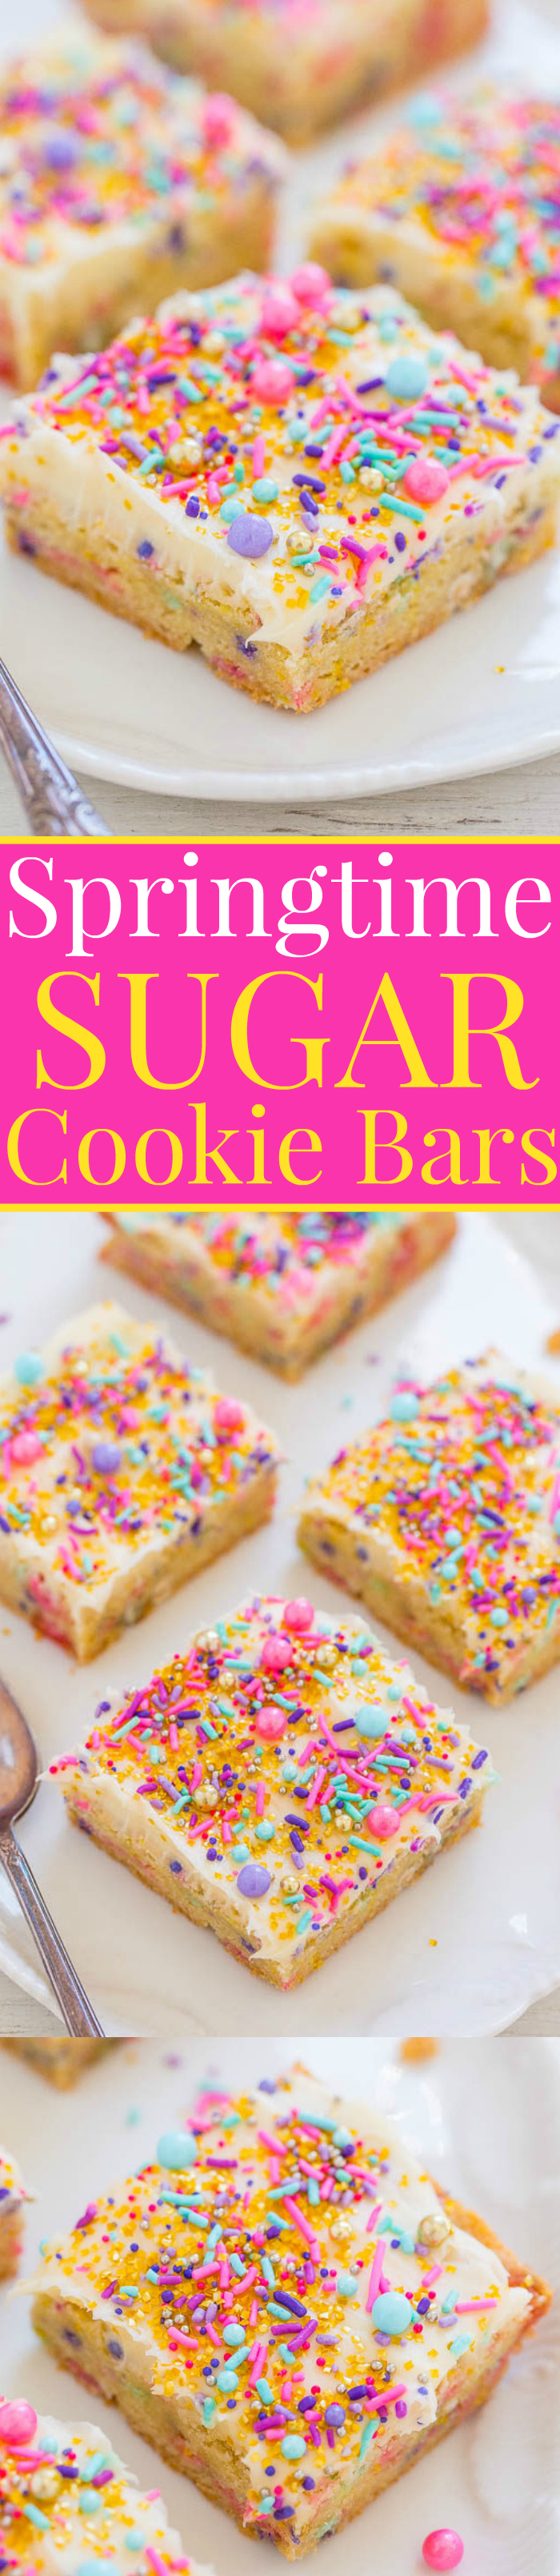 Springtime Sugar Cookie Bars with Cream Cheese Frosting - Sugar cookies in bar form with SPRINKLES galore!! FAST, EASY and yummy! Great for springtime, Easter, Mother's Day, showers, and parties!!